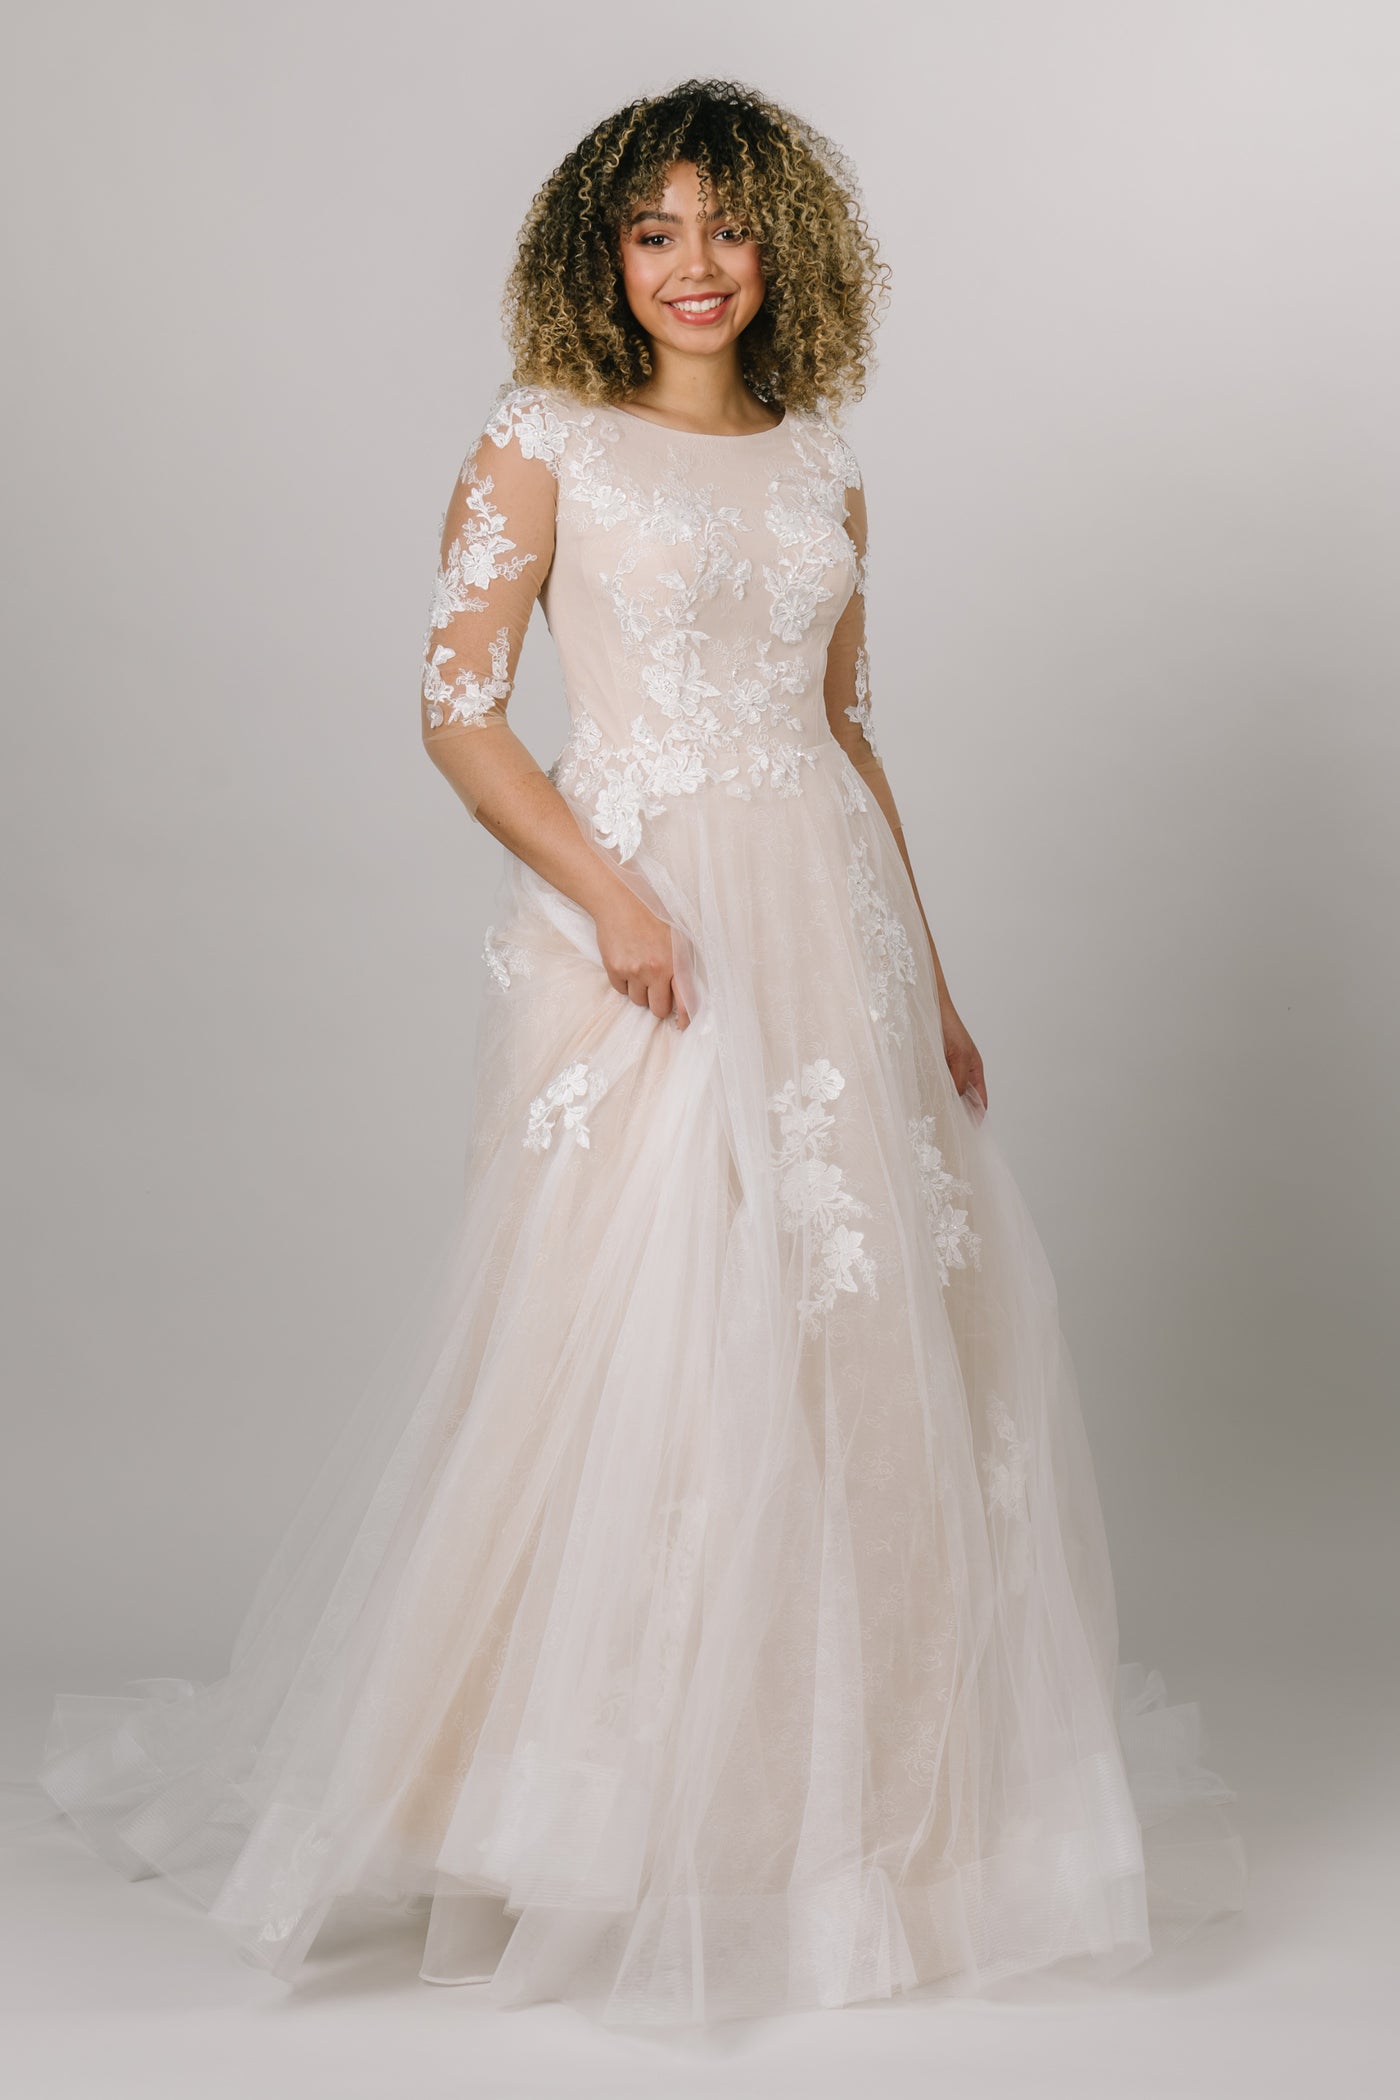 modest wedding dress is the whimsical gown of our dreams! With a soft lace print under the top layer of appliques, mesh sleeves, and a scoop neck, you'll be dancing the night away. 